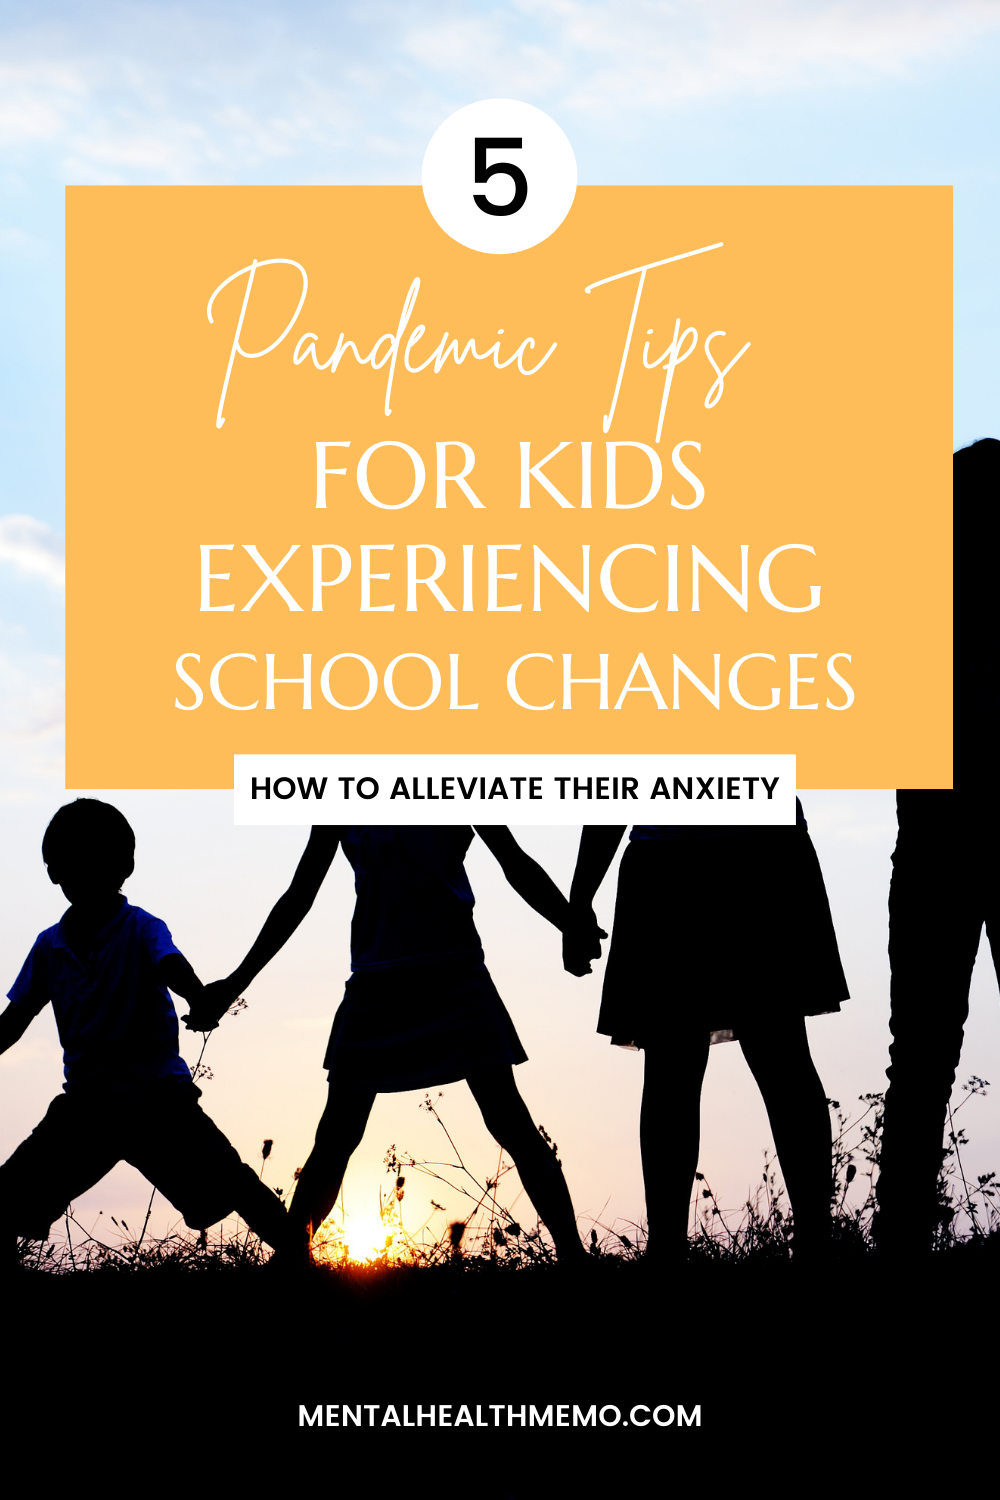 Pin: 5 Tips to Help Children Cope with Pandemic School Changes